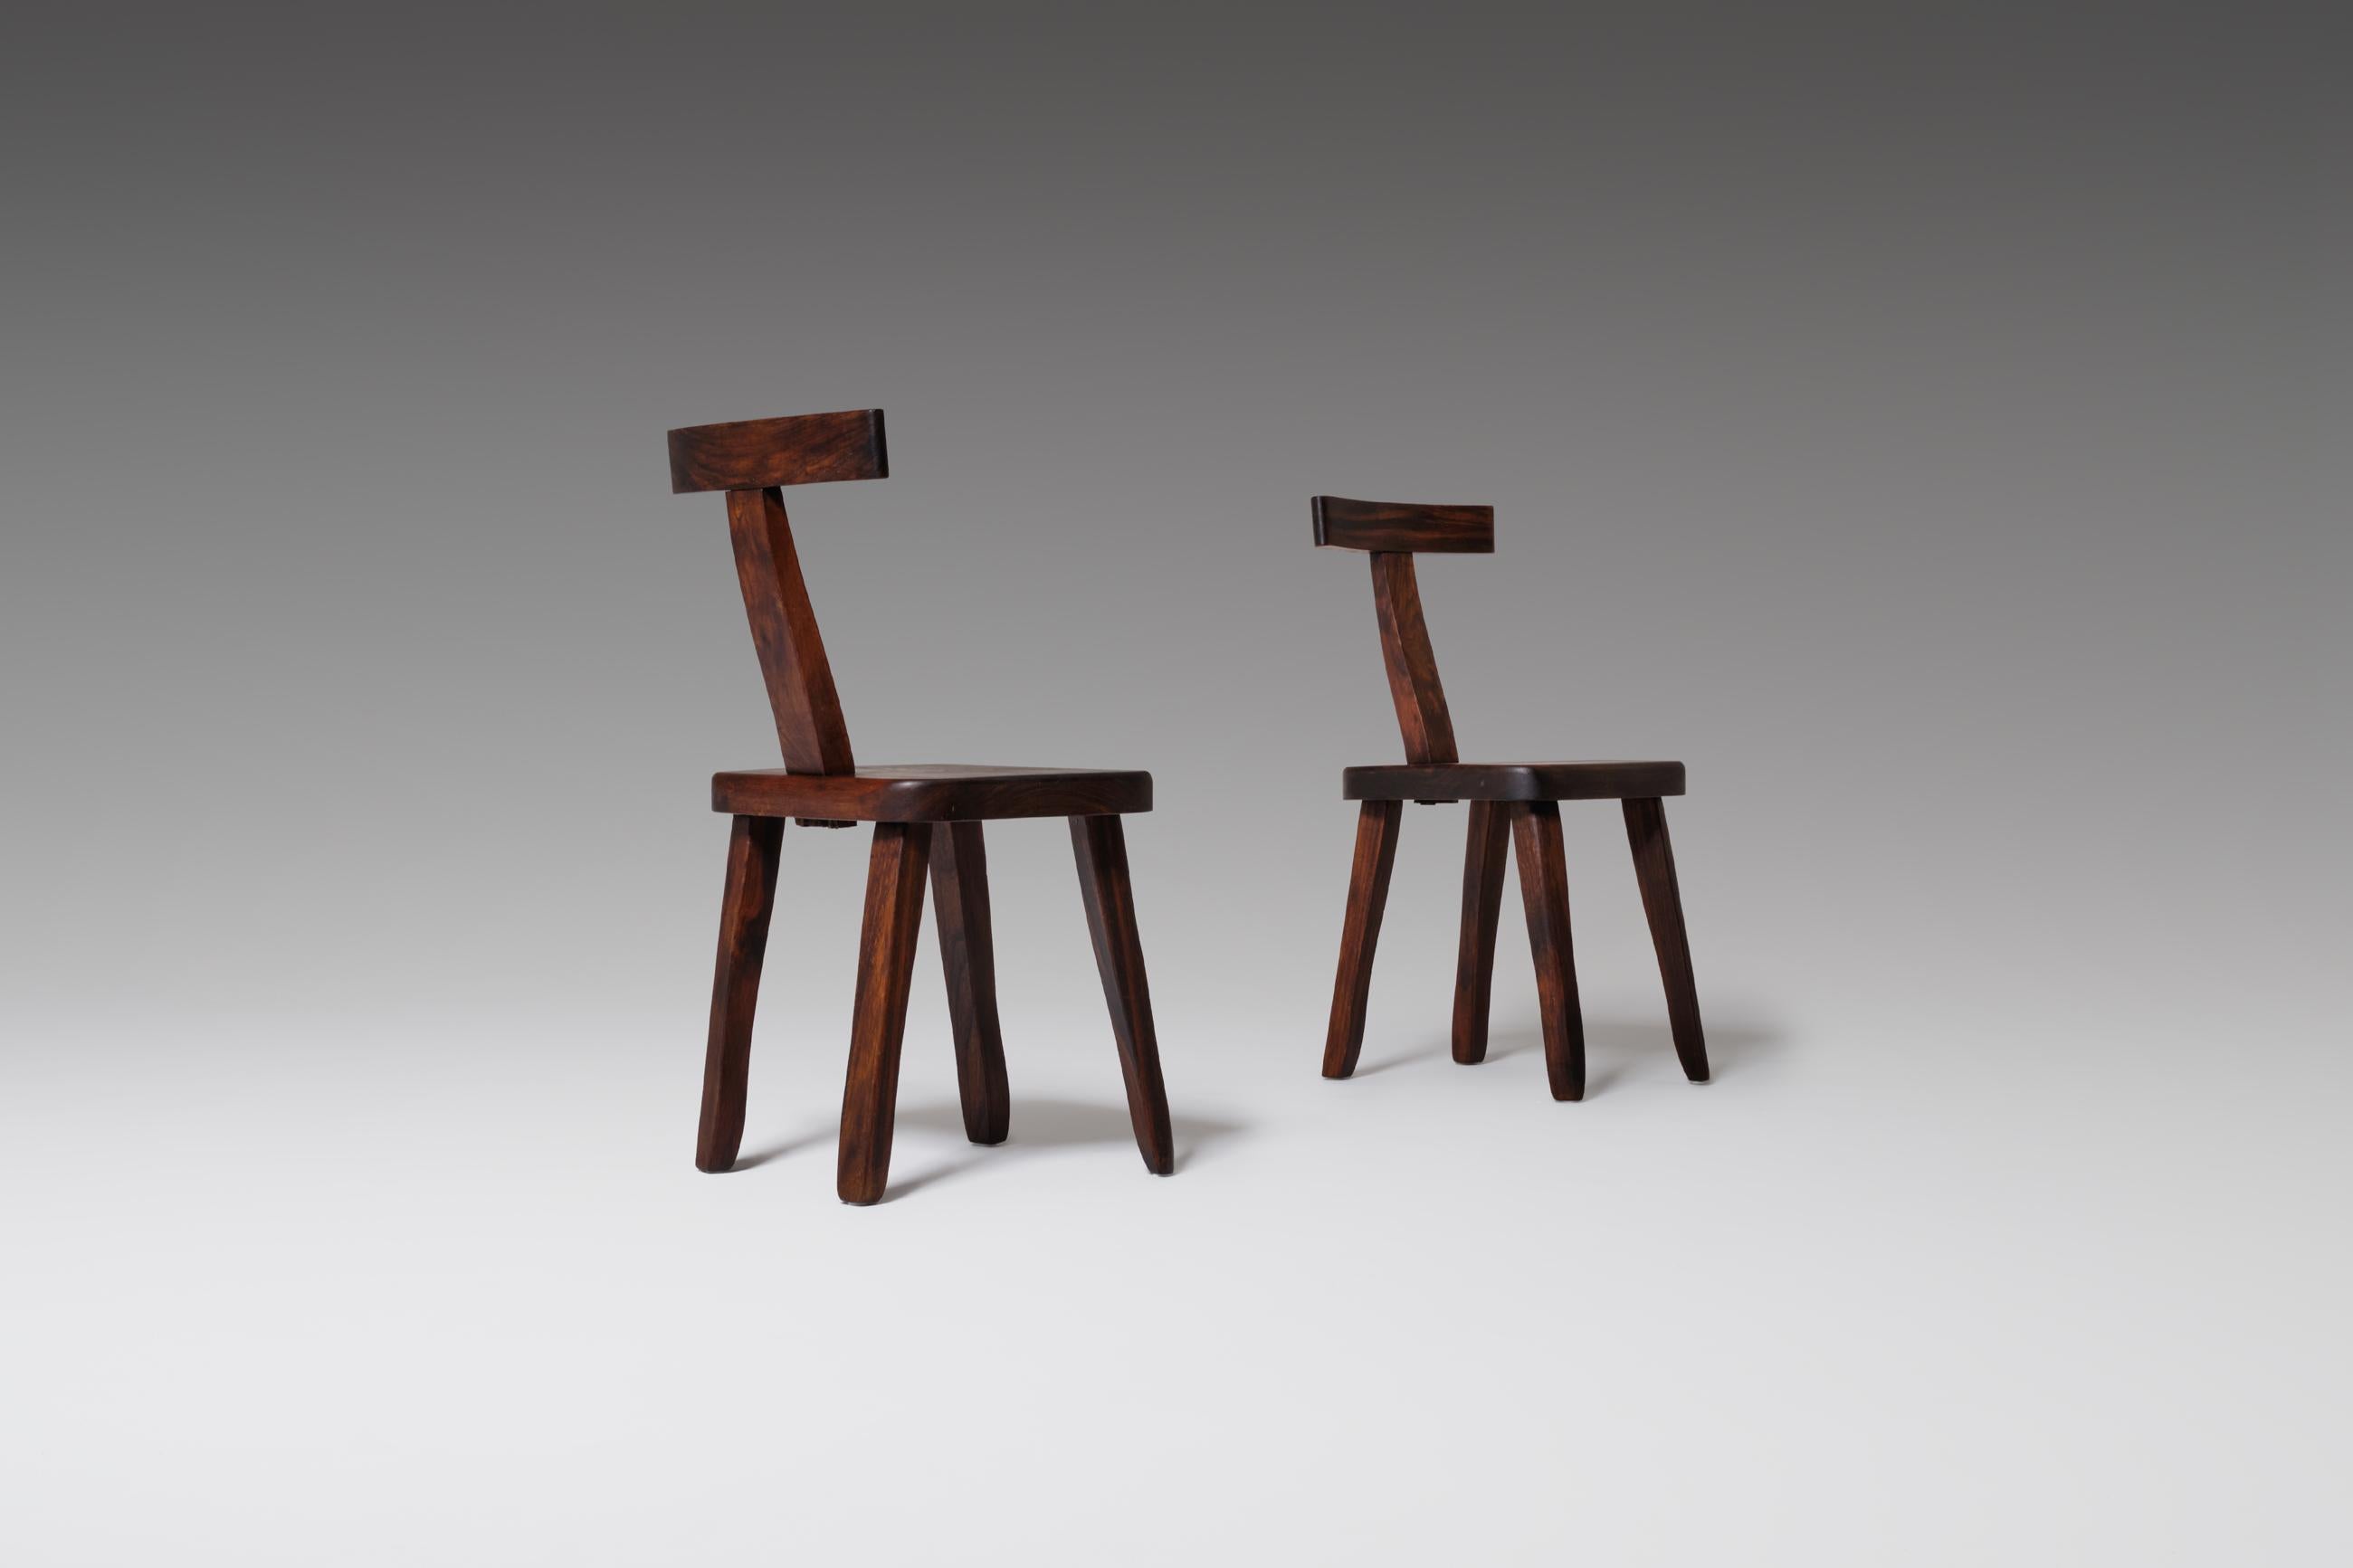 Set of two sculptural side chairs by Olavi Hänninen for Mikko Nupponen, Finland, 1950s. The chairs are constructed out of dark stained Elm wood with nice warm tones. Every single element of the chairs is carved by hand, therefore no piece is the